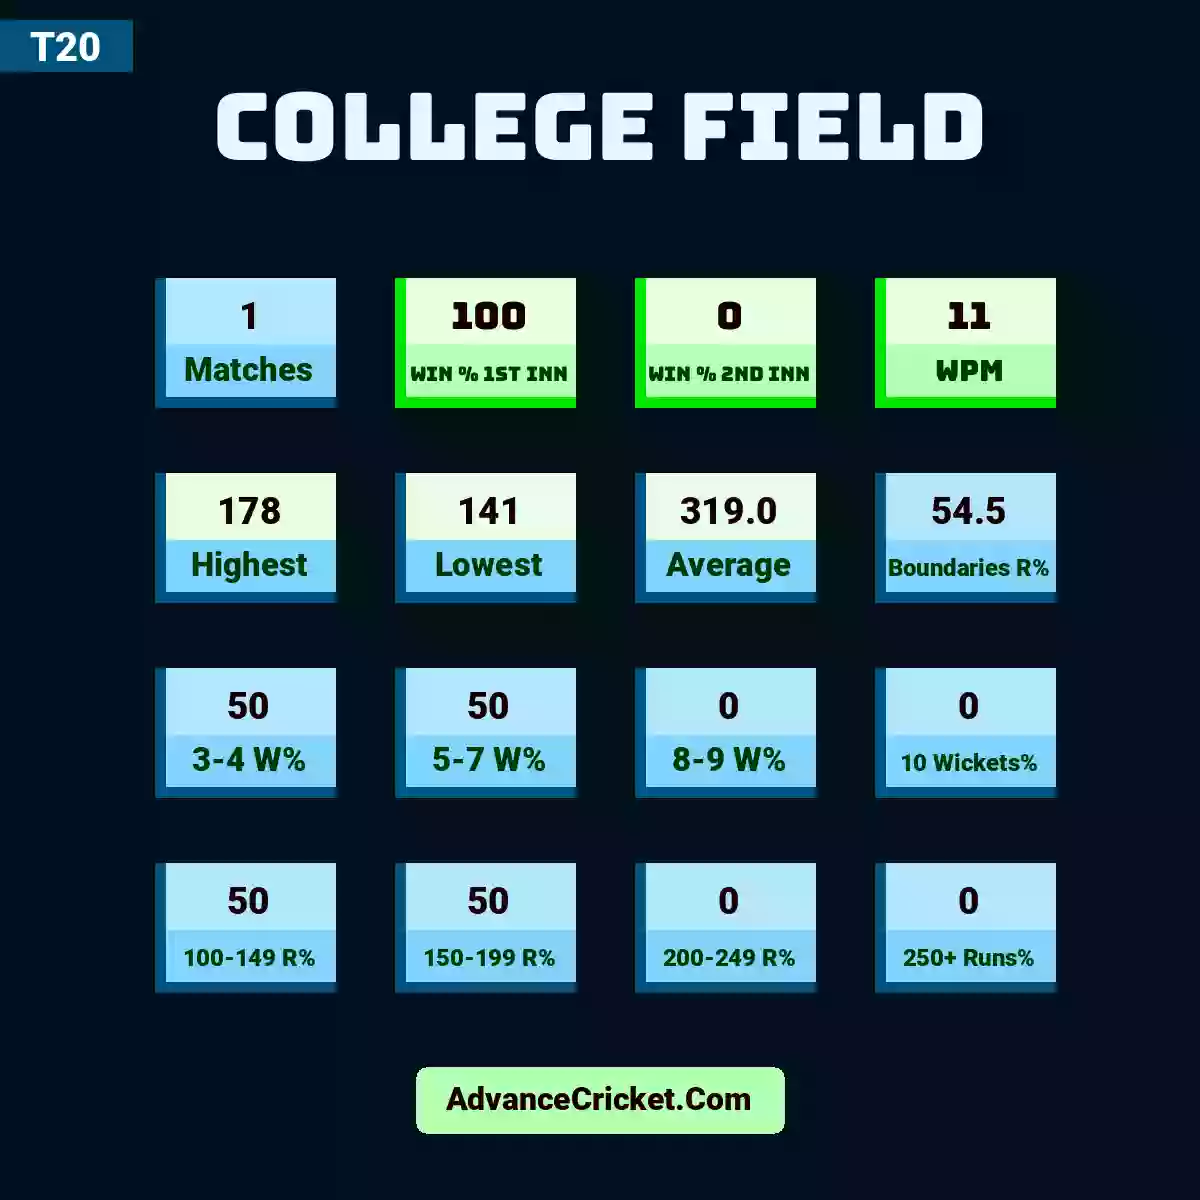 Image showing College Field with Matches: 1, Win % 1st Inn: 100, Win % 2nd Inn: 0, WPM: 11, Highest: 178, Lowest: 141, Average: 319.0, Boundaries R%: 54.5, 3-4 W%: 50, 5-7 W%: 50, 8-9 W%: 0, 10 Wickets%: 0, 100-149 R%: 50, 150-199 R%: 50, 200-249 R%: 0, 250+ Runs%: 0.